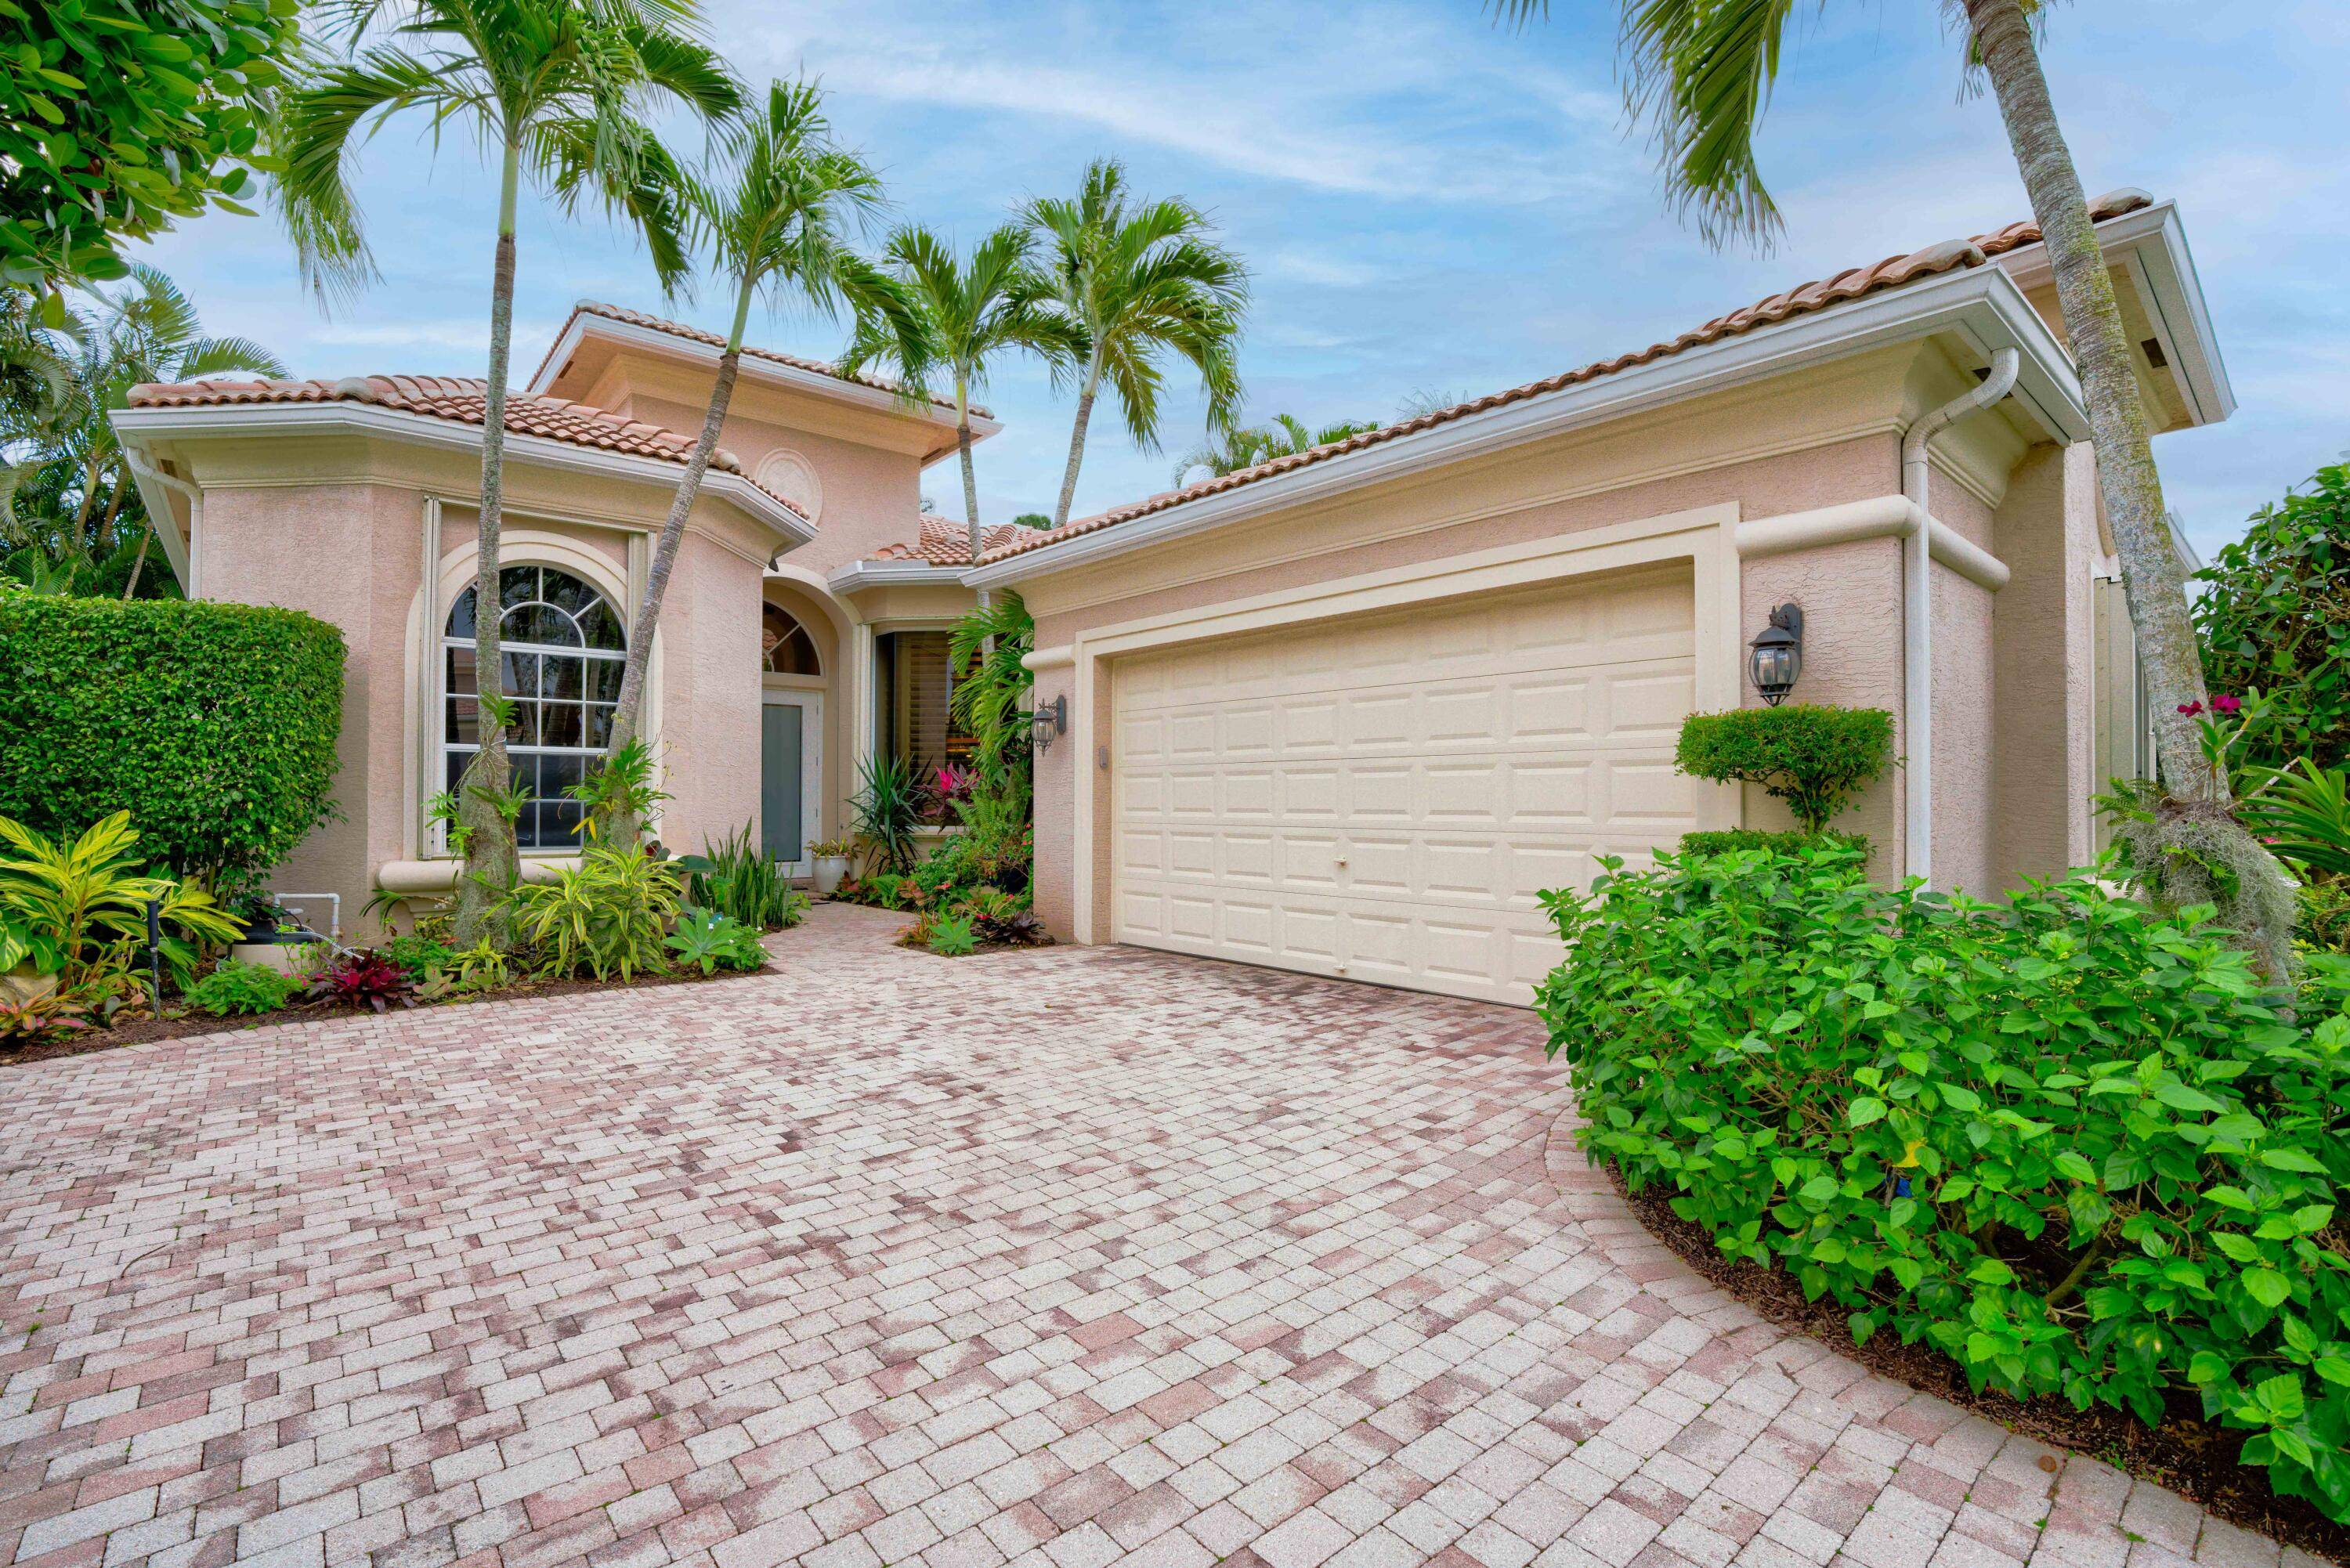 Enjoy the ease of country club living in one of the finest, award winning private club communities in South Florida, The Country Club at Mirasol.